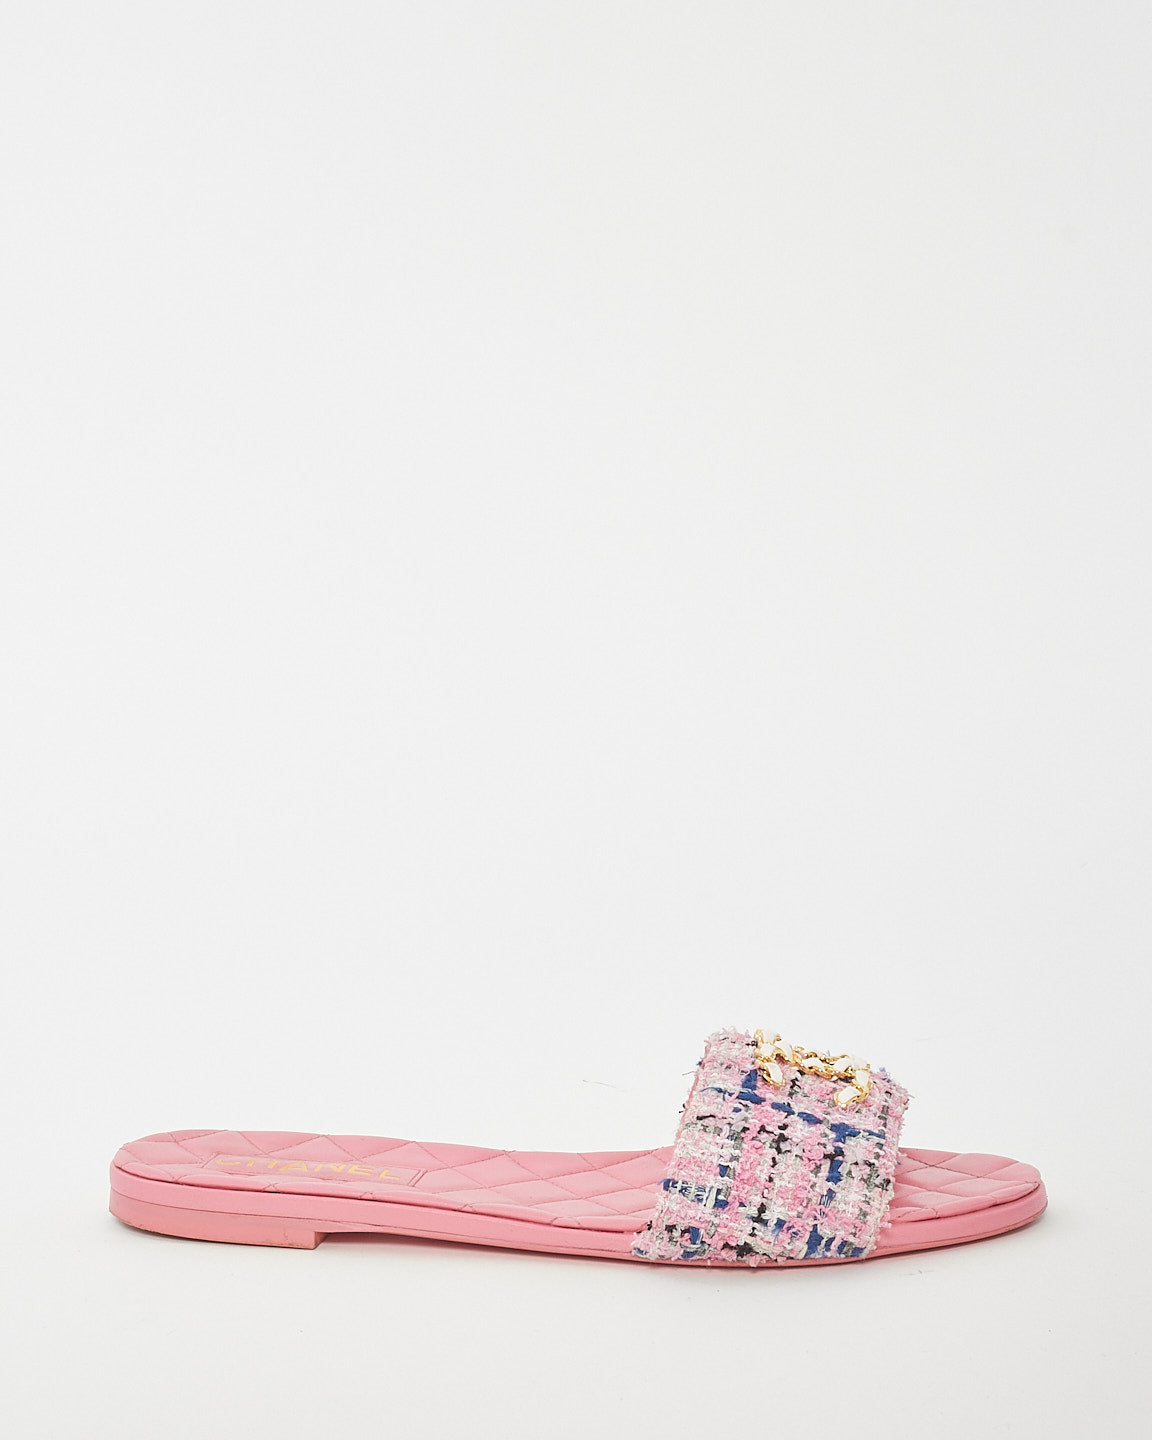 Chanel Pink Multi Leather & Tweed Logo Flat Sandals - 41